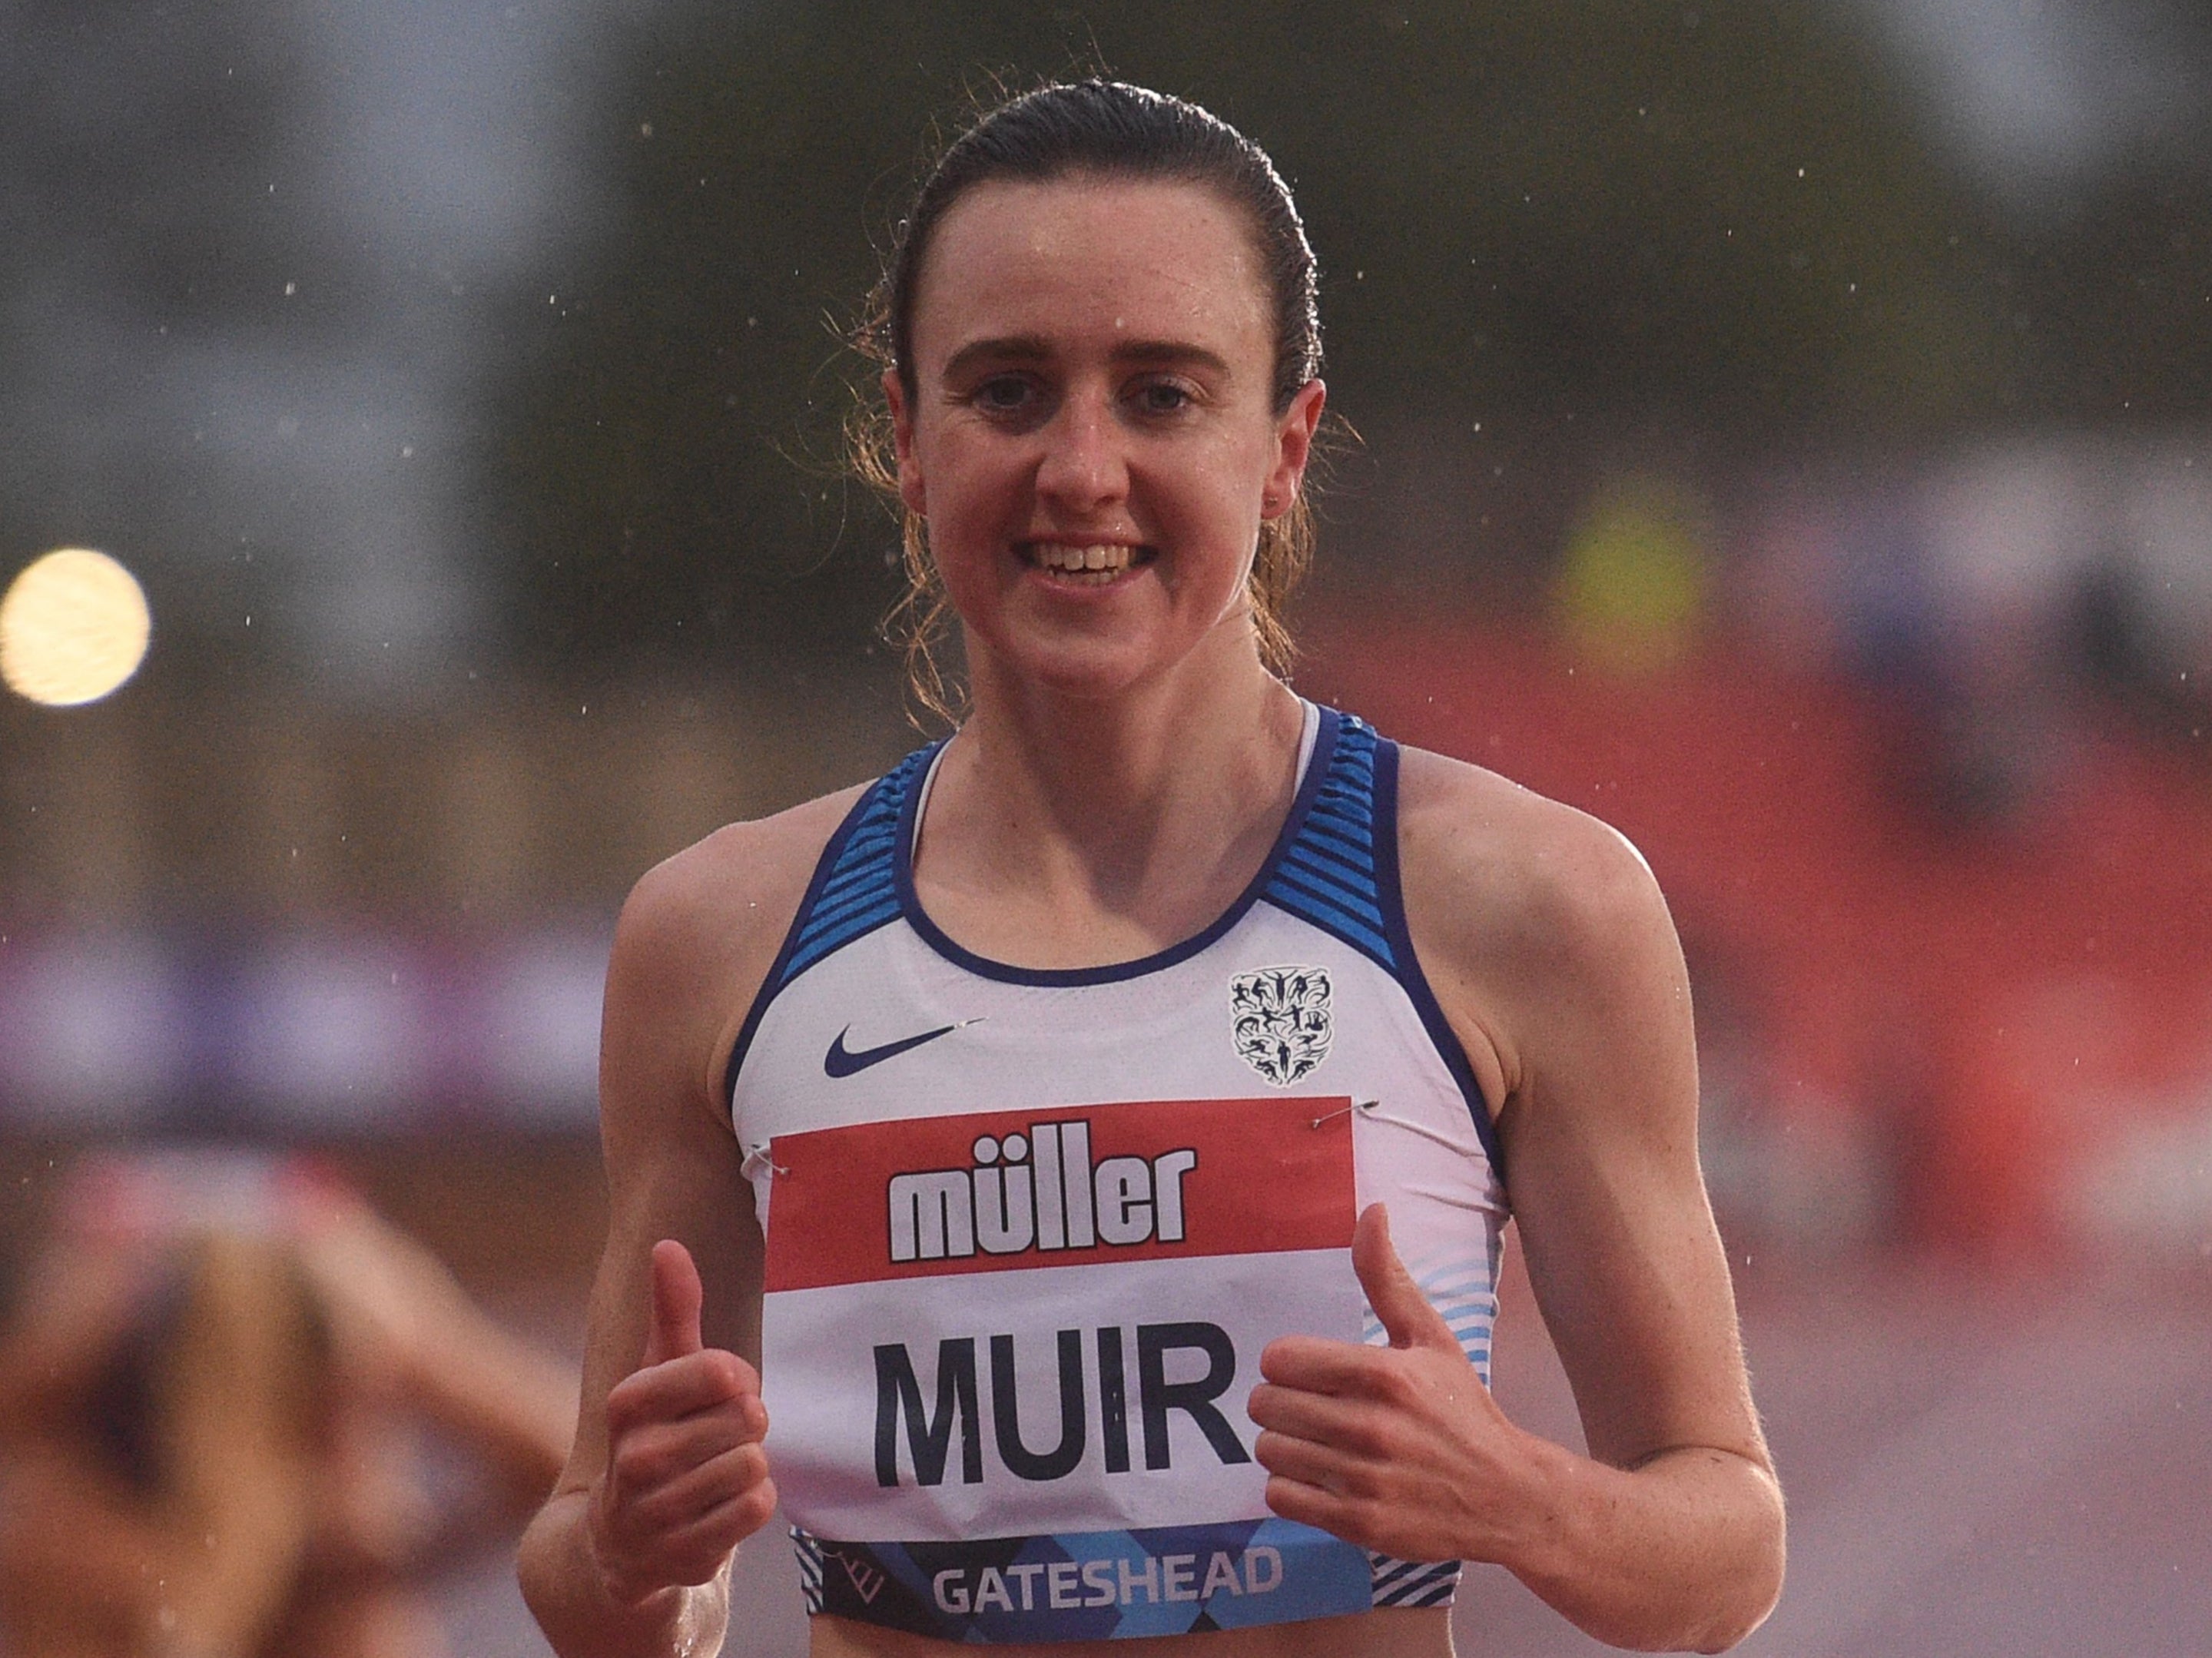 Laura Muir is one of Britain’s leading stars in middle-distance running